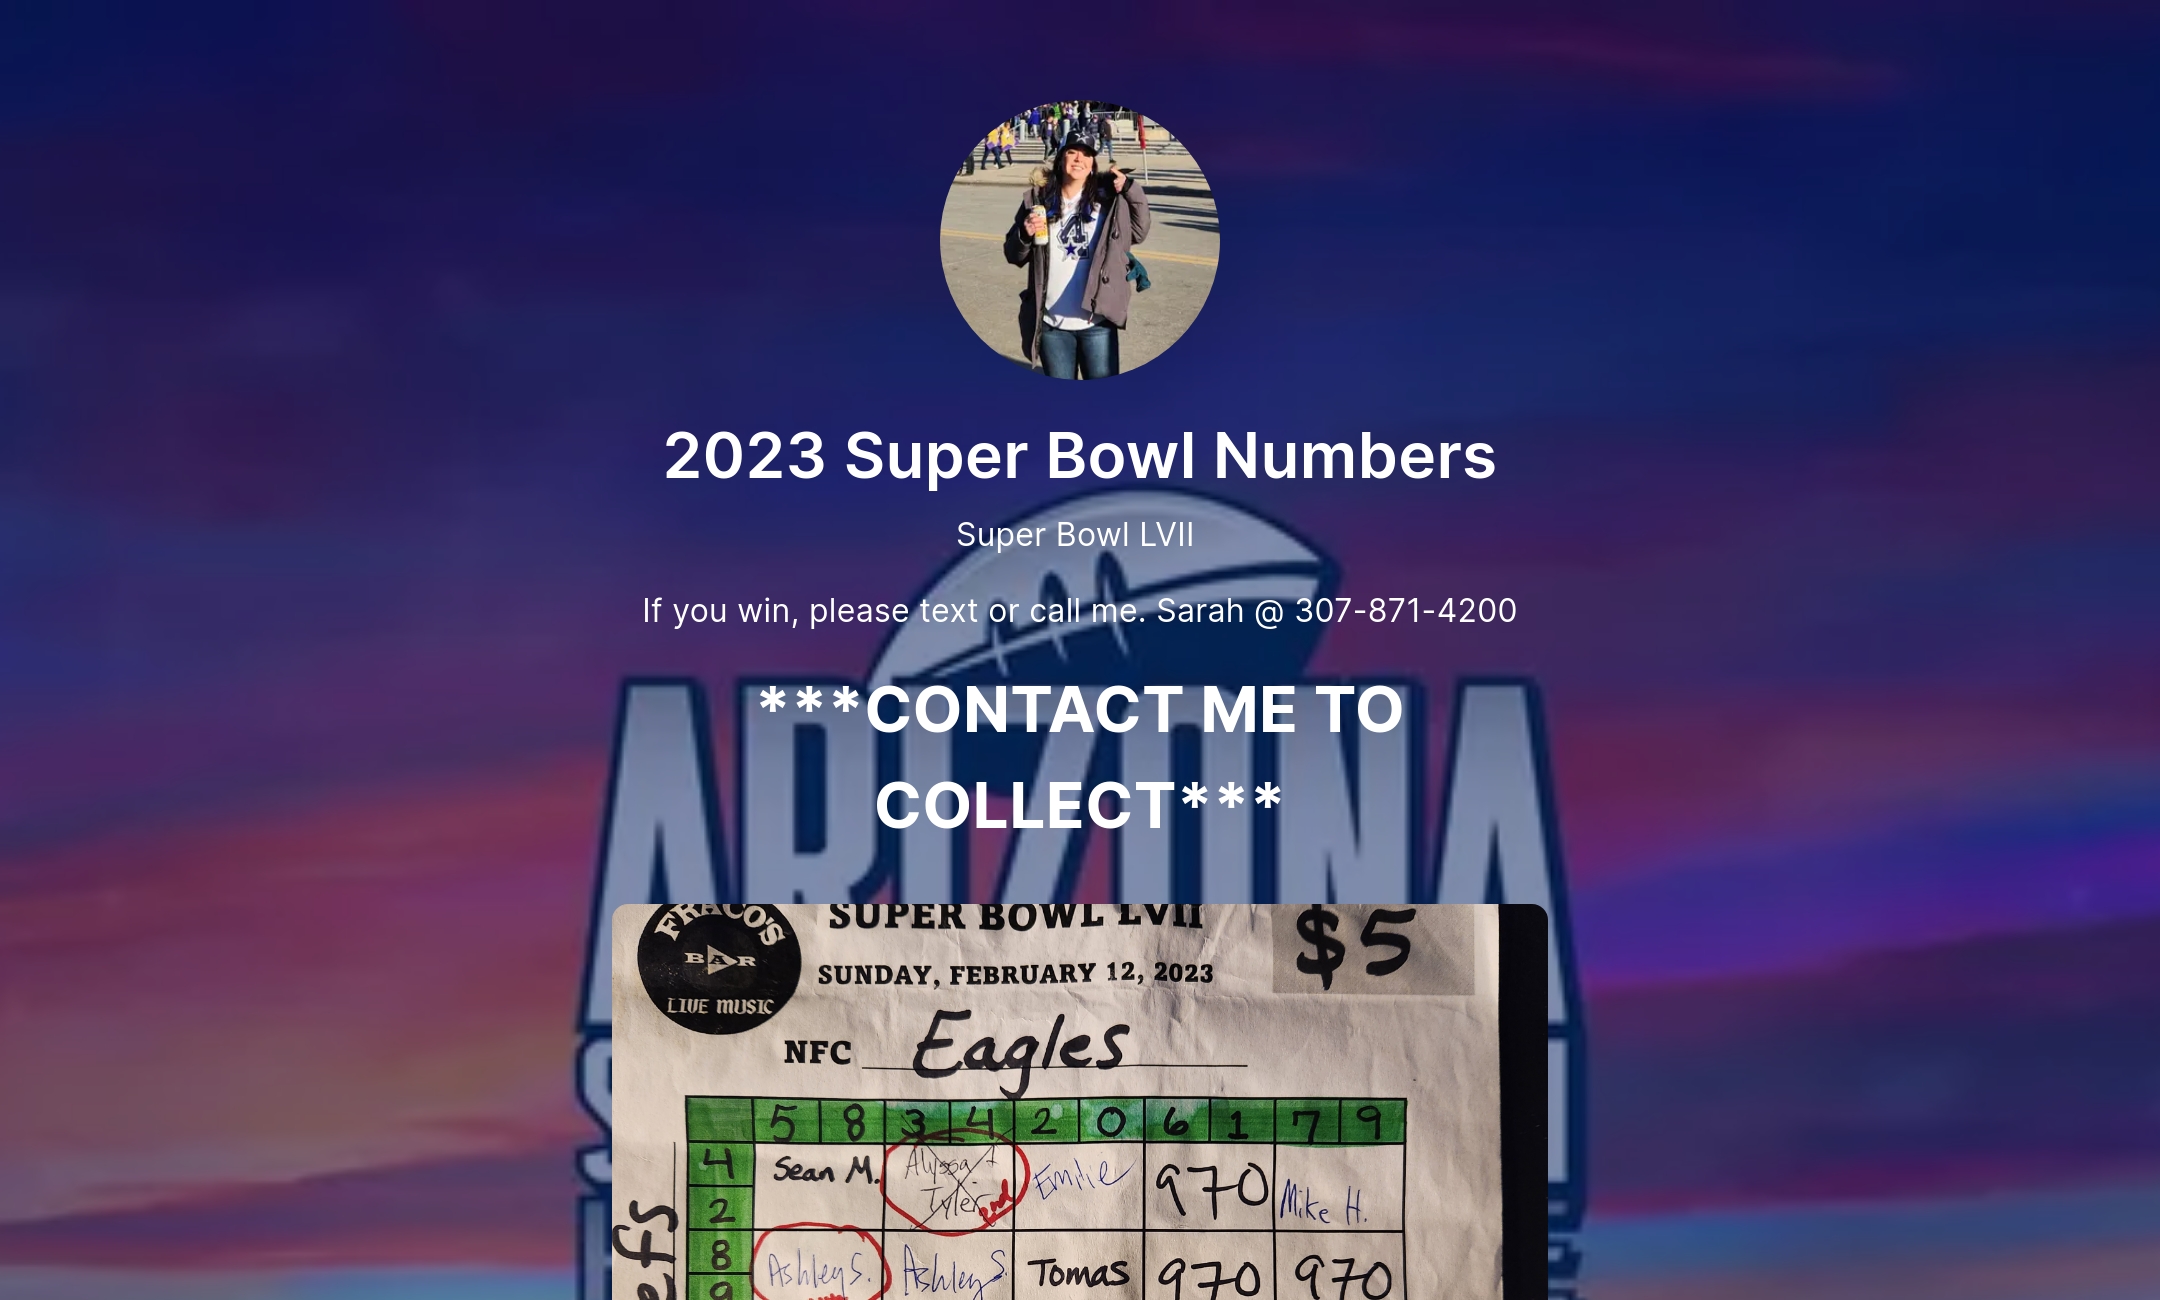 2023 Super Bowl Numbers' Flowpage